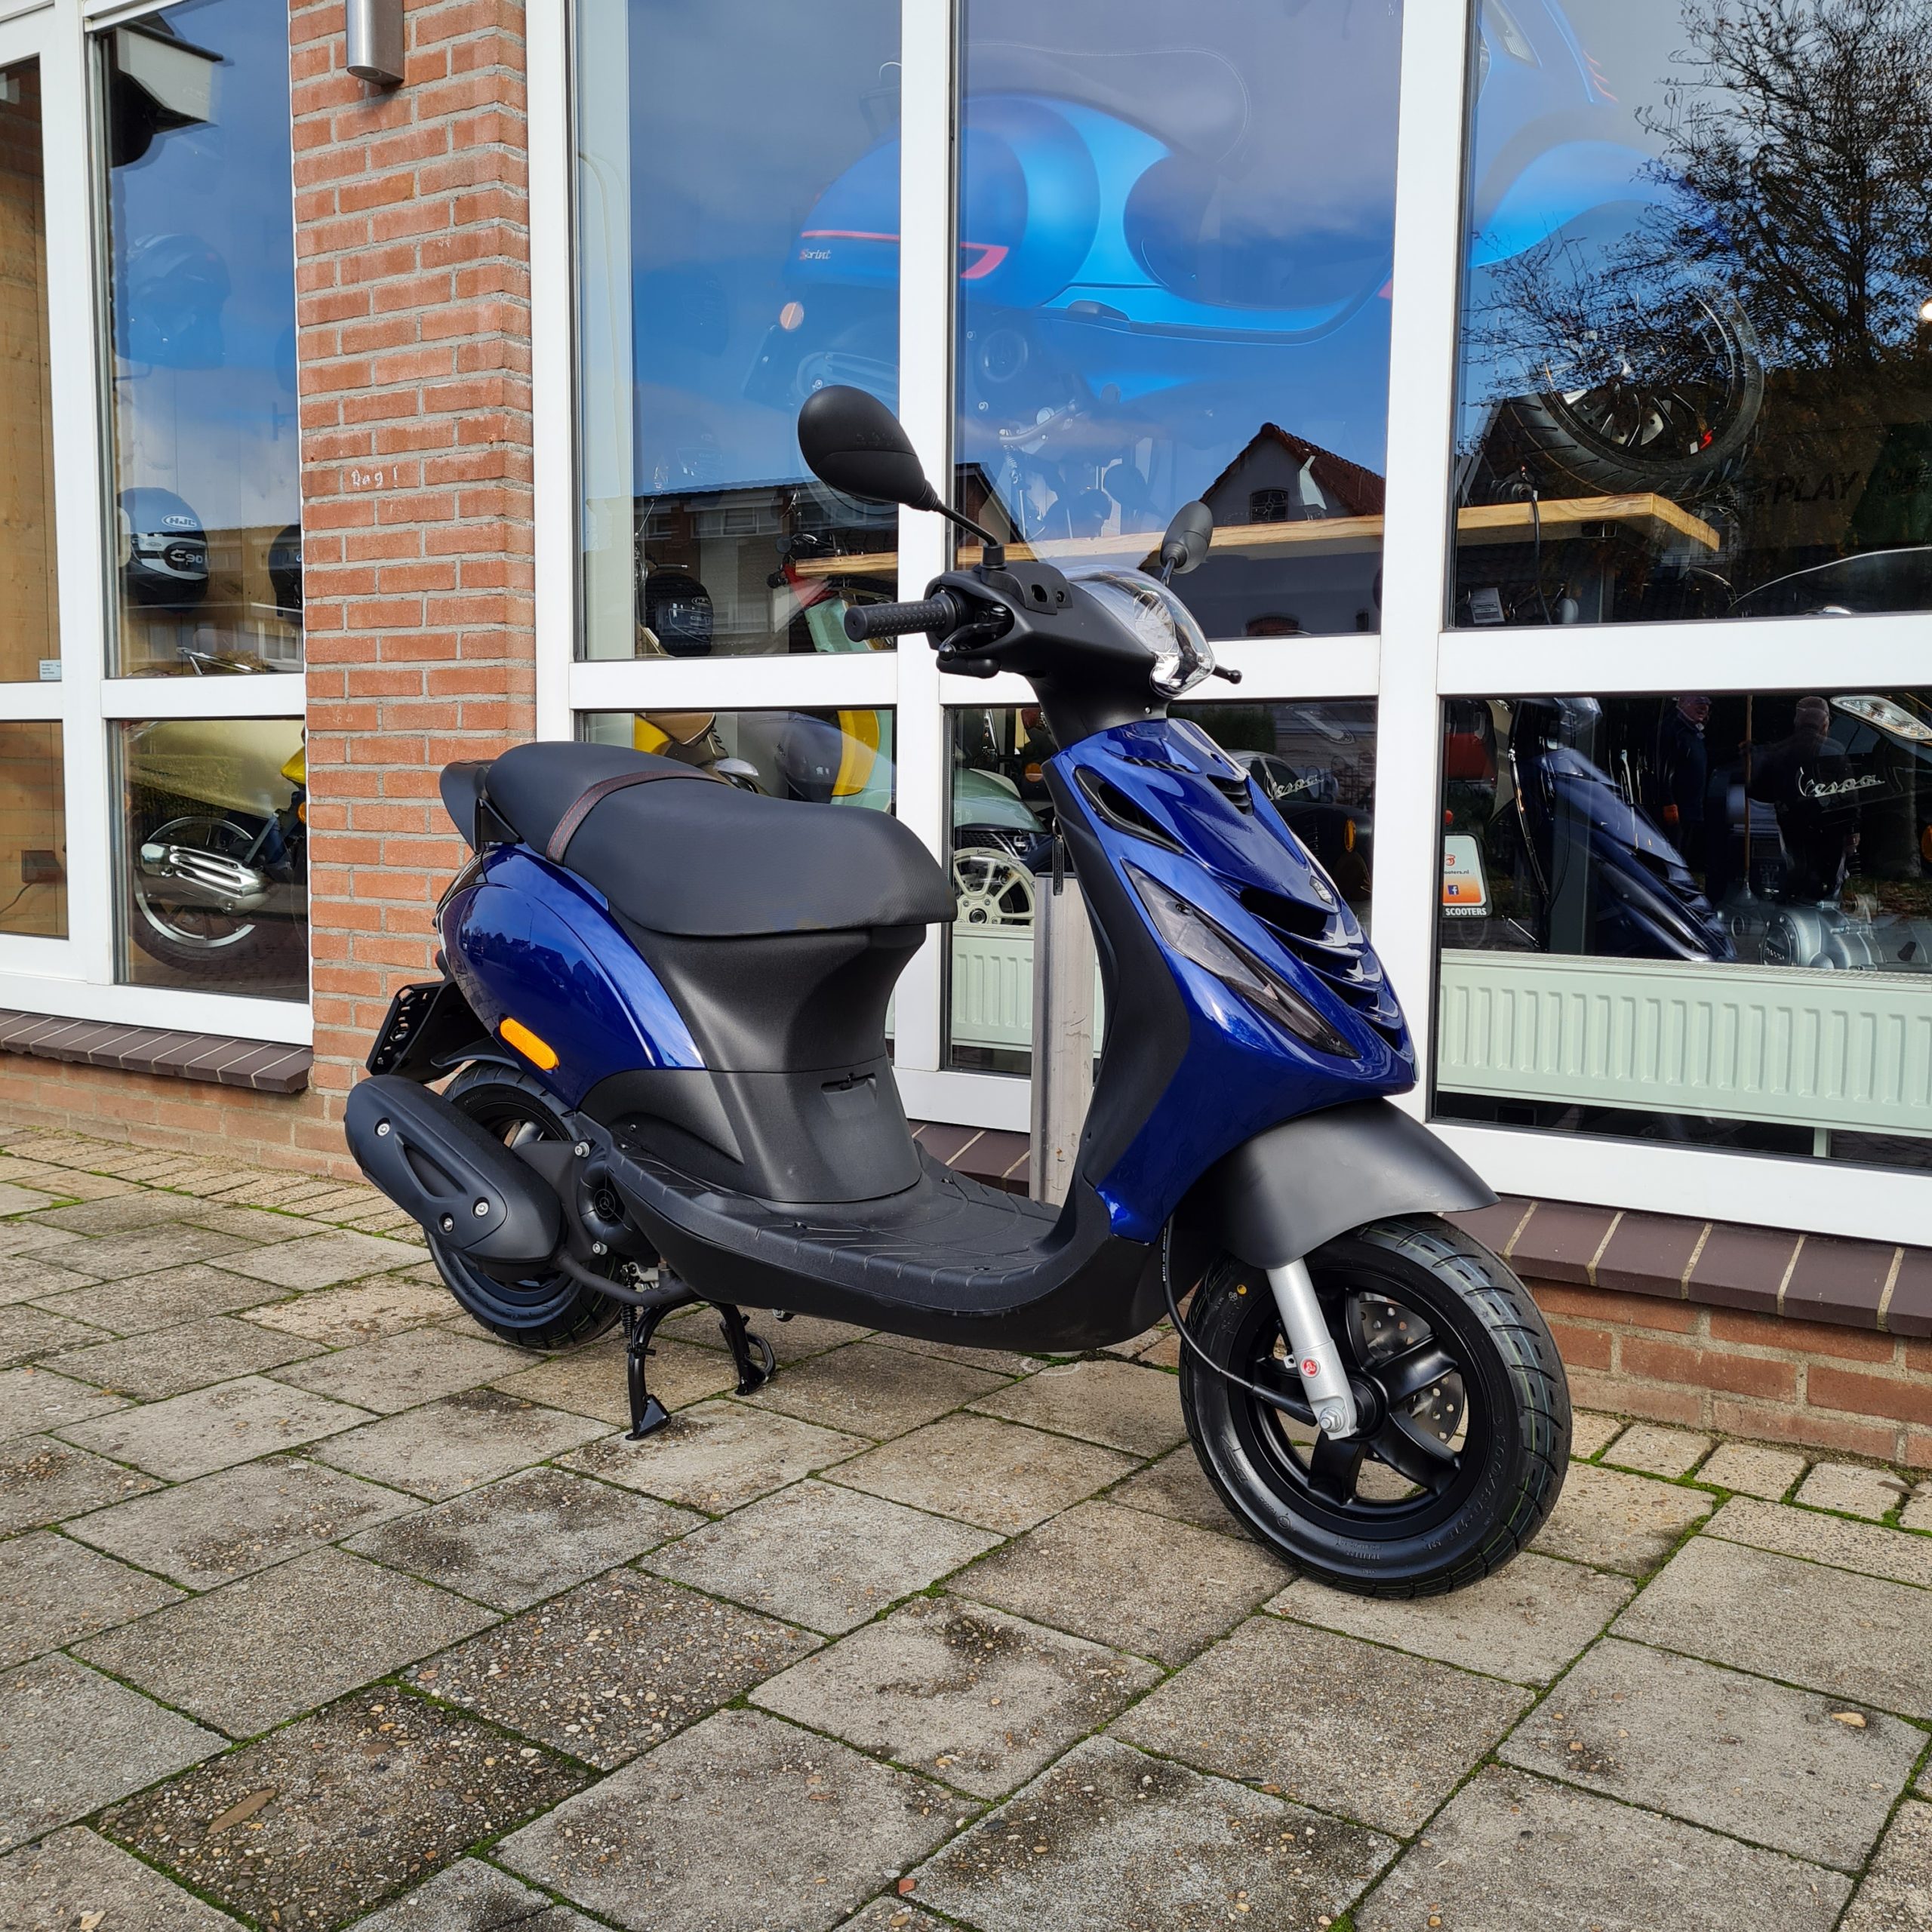 https://www.betuwescooters.nl/wp-content/uploads/2020/11/20201031_115138-scaled.jpg